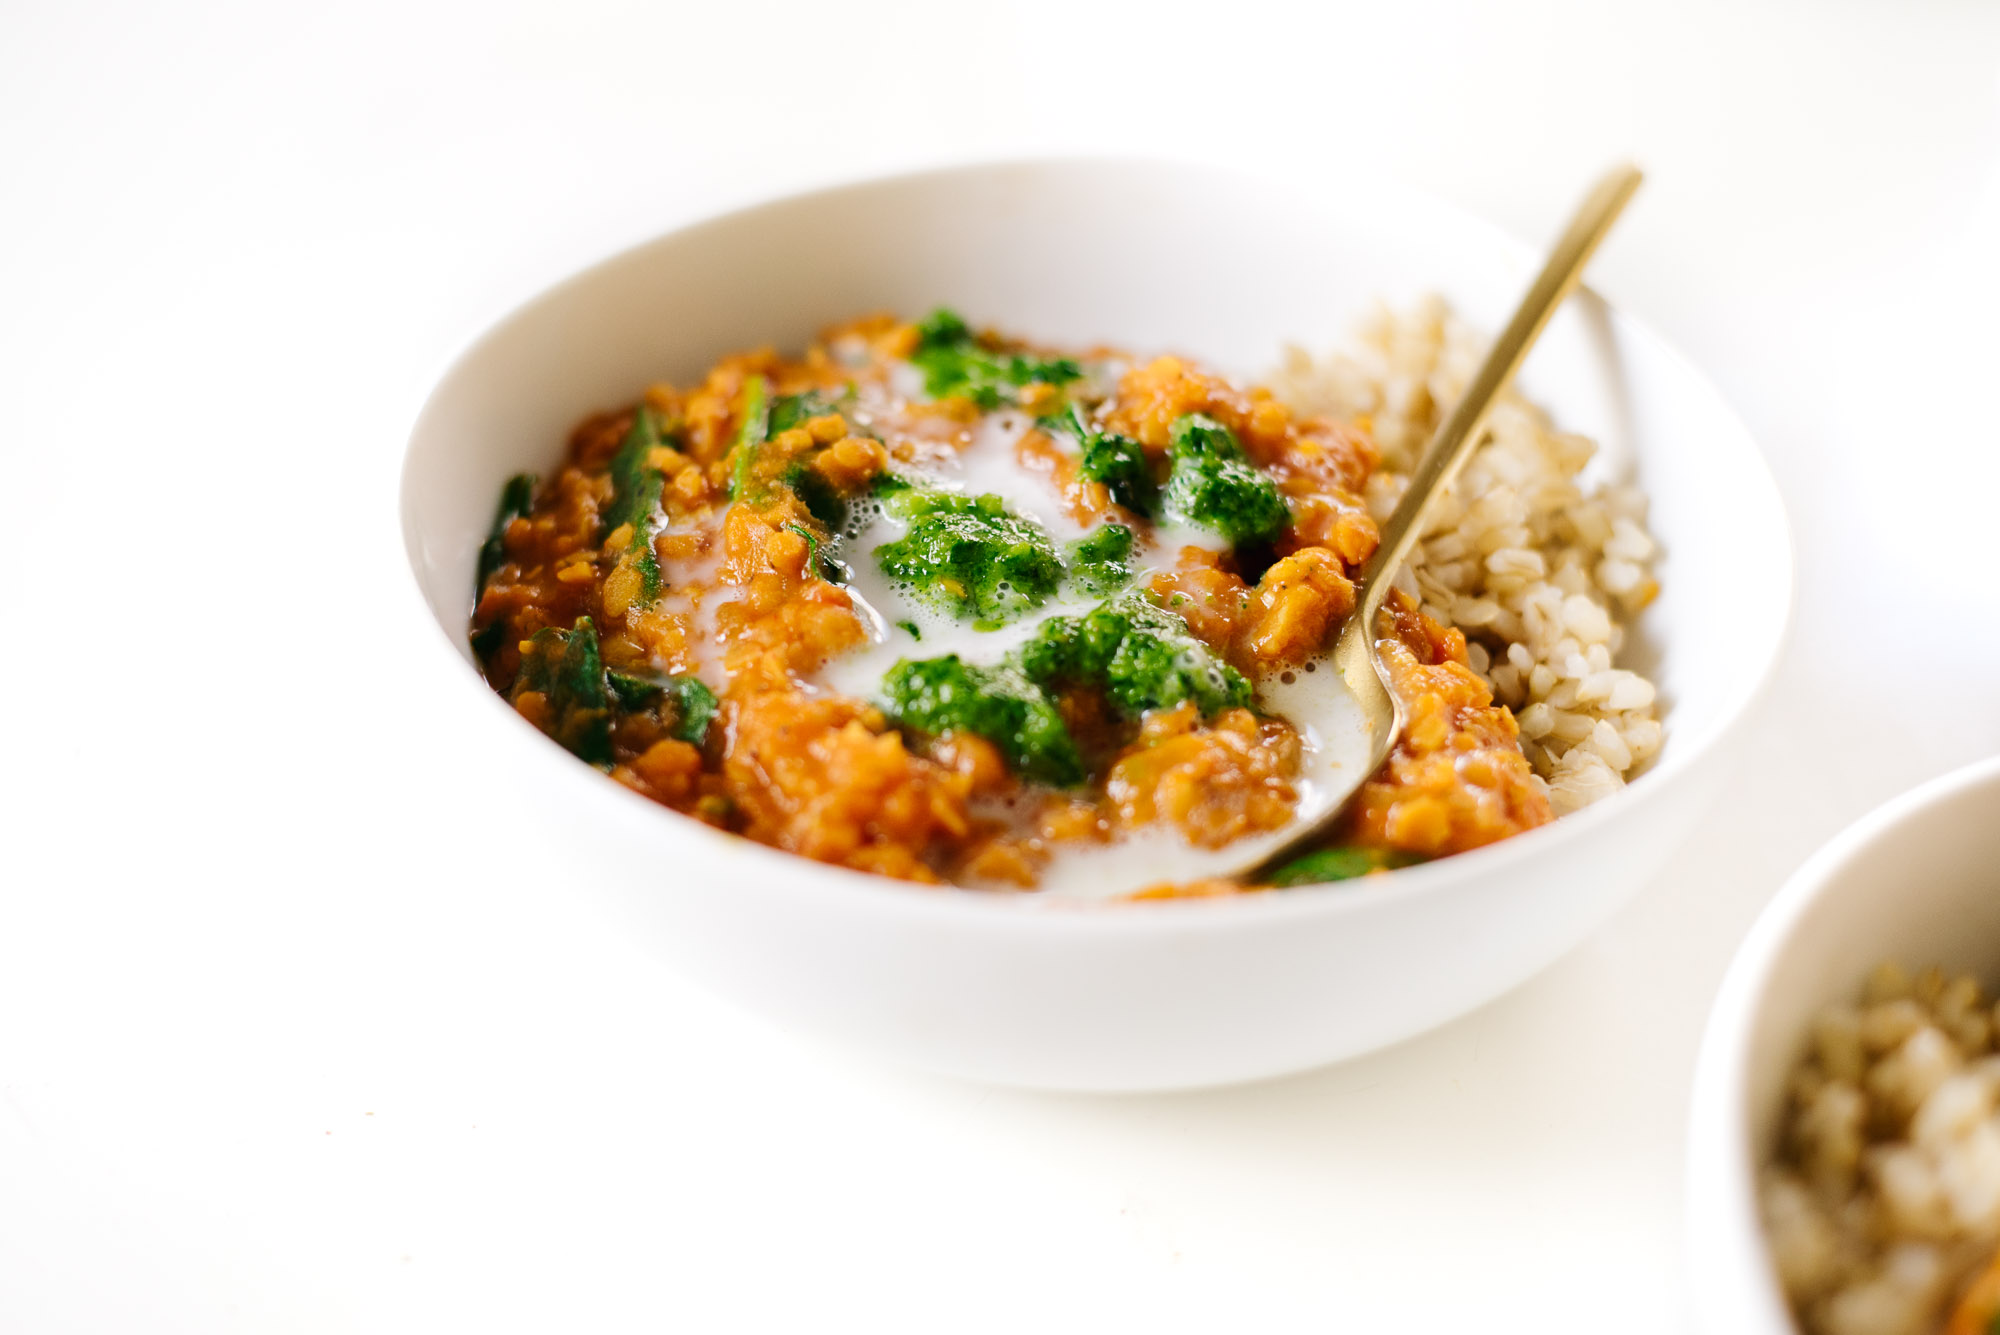 Coconut Curry Lentils from Pretty Simple Cooking